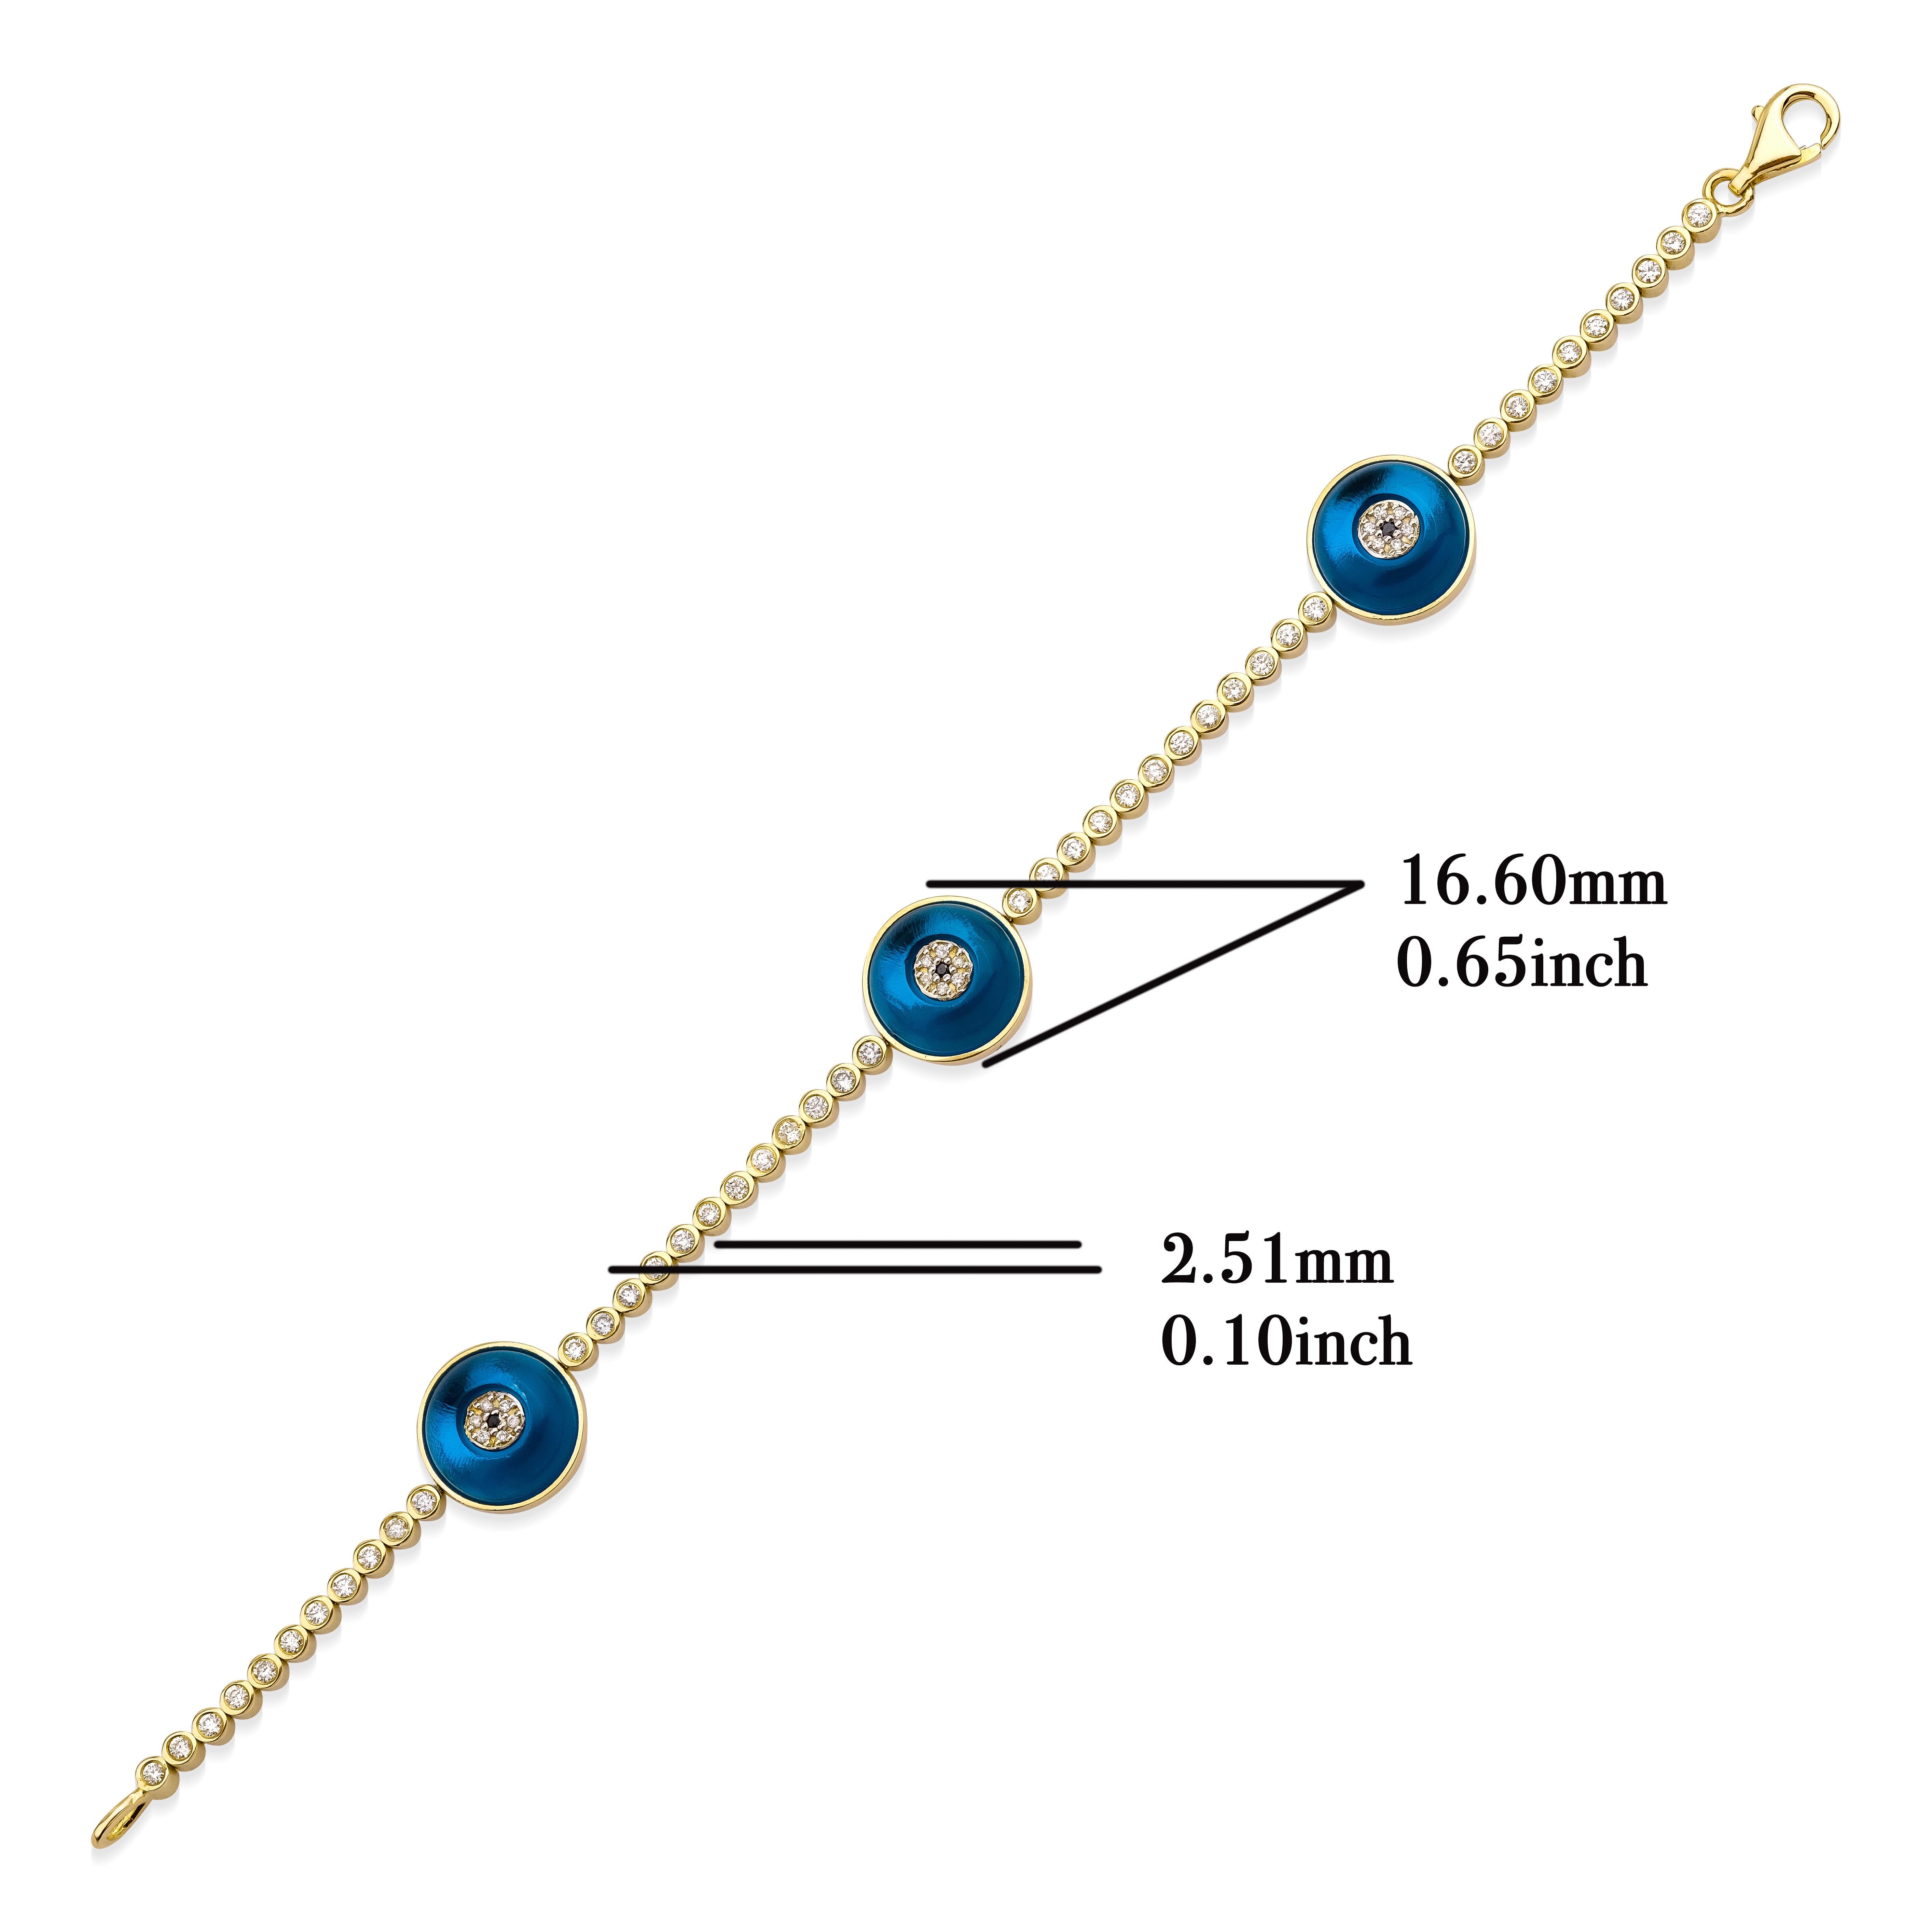 Against Evil Eye Bracelet, 0.78ct Natural Diamond, Solid 14k Yellow Gold, 7 inch

Product Details :

• Made to Order

• Gold Kt: 14kt (18kt available)

• Available Gold Colors: Rose Gold, Yellow Gold, White Gold

• 0.75ct Natural Diamond

• 0.03ct